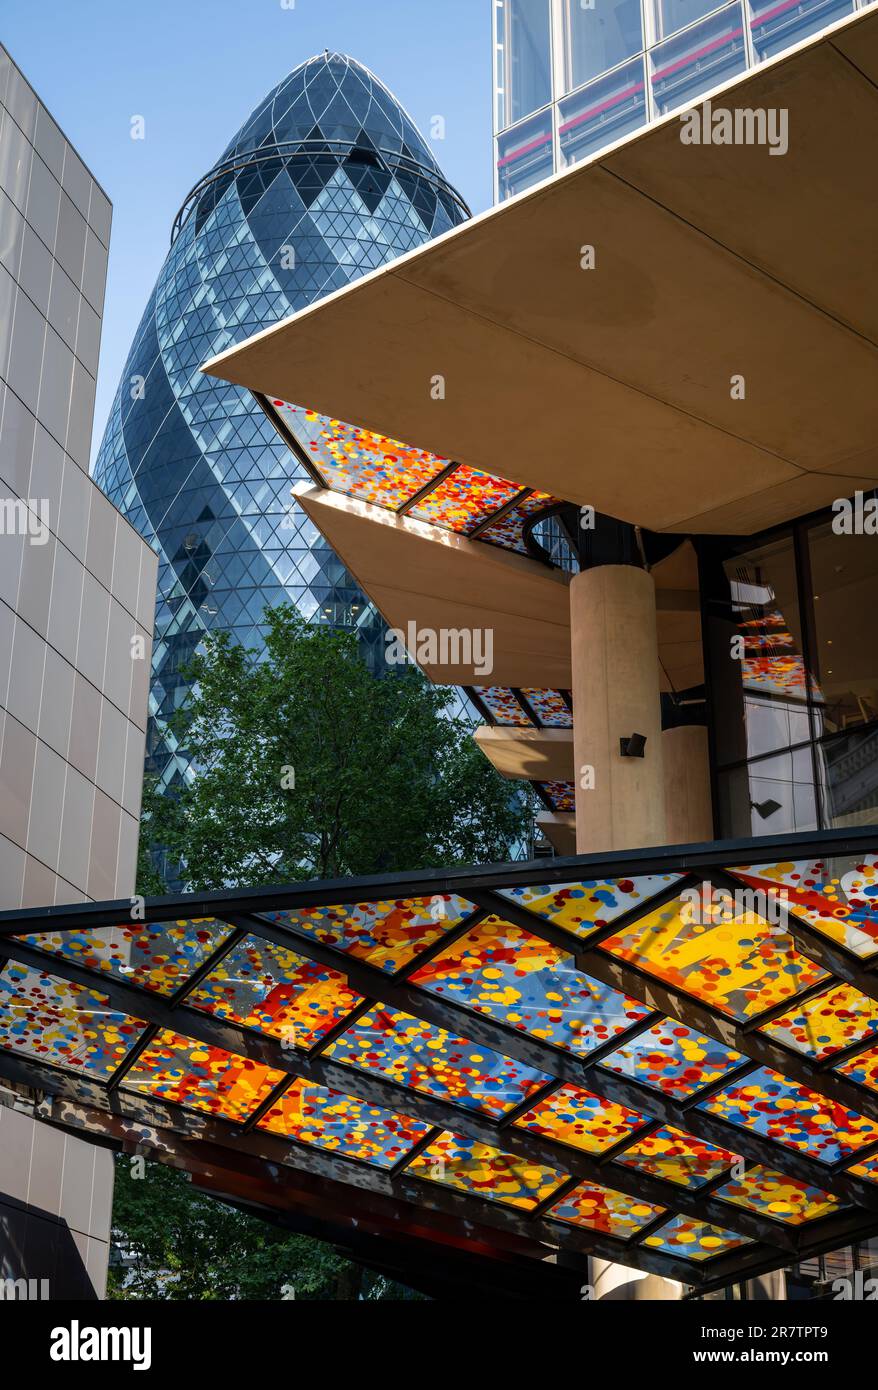 London, UK:  The colorful canopy above the entrance to 22 Bishopsgate in the City of London with the Gherkin skyscraper behind. Stock Photo